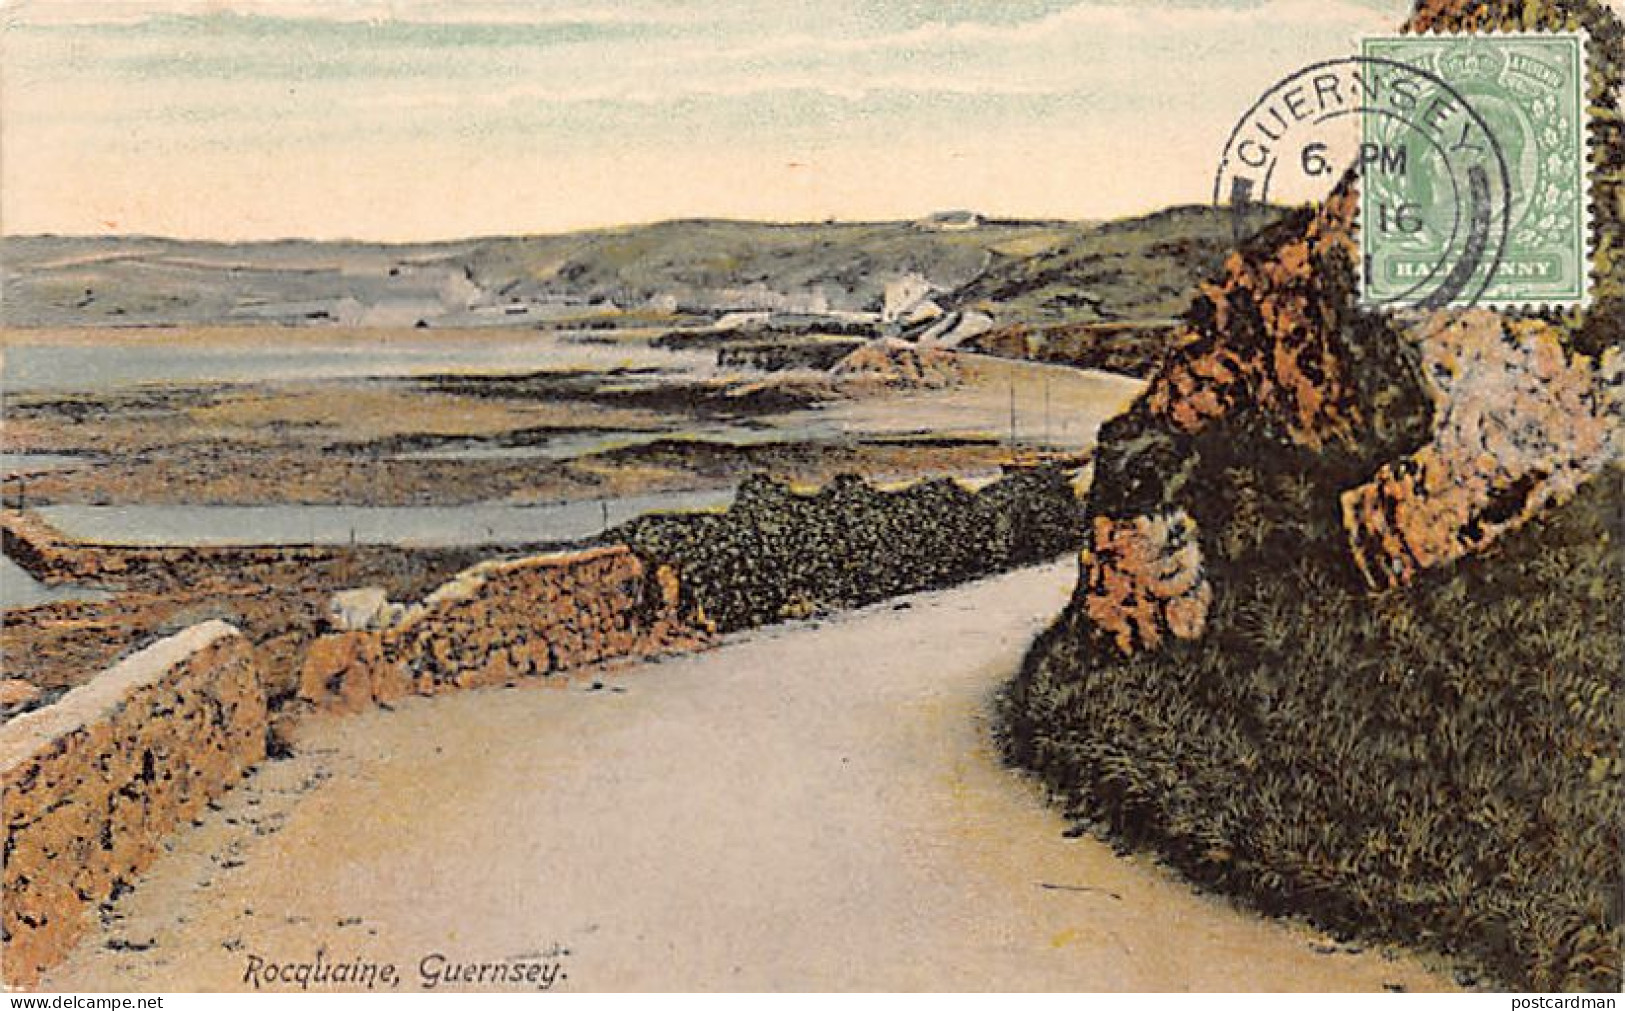 Guernsey - Rocquaine - Publ. The Woodbury Series 2413 - Guernsey